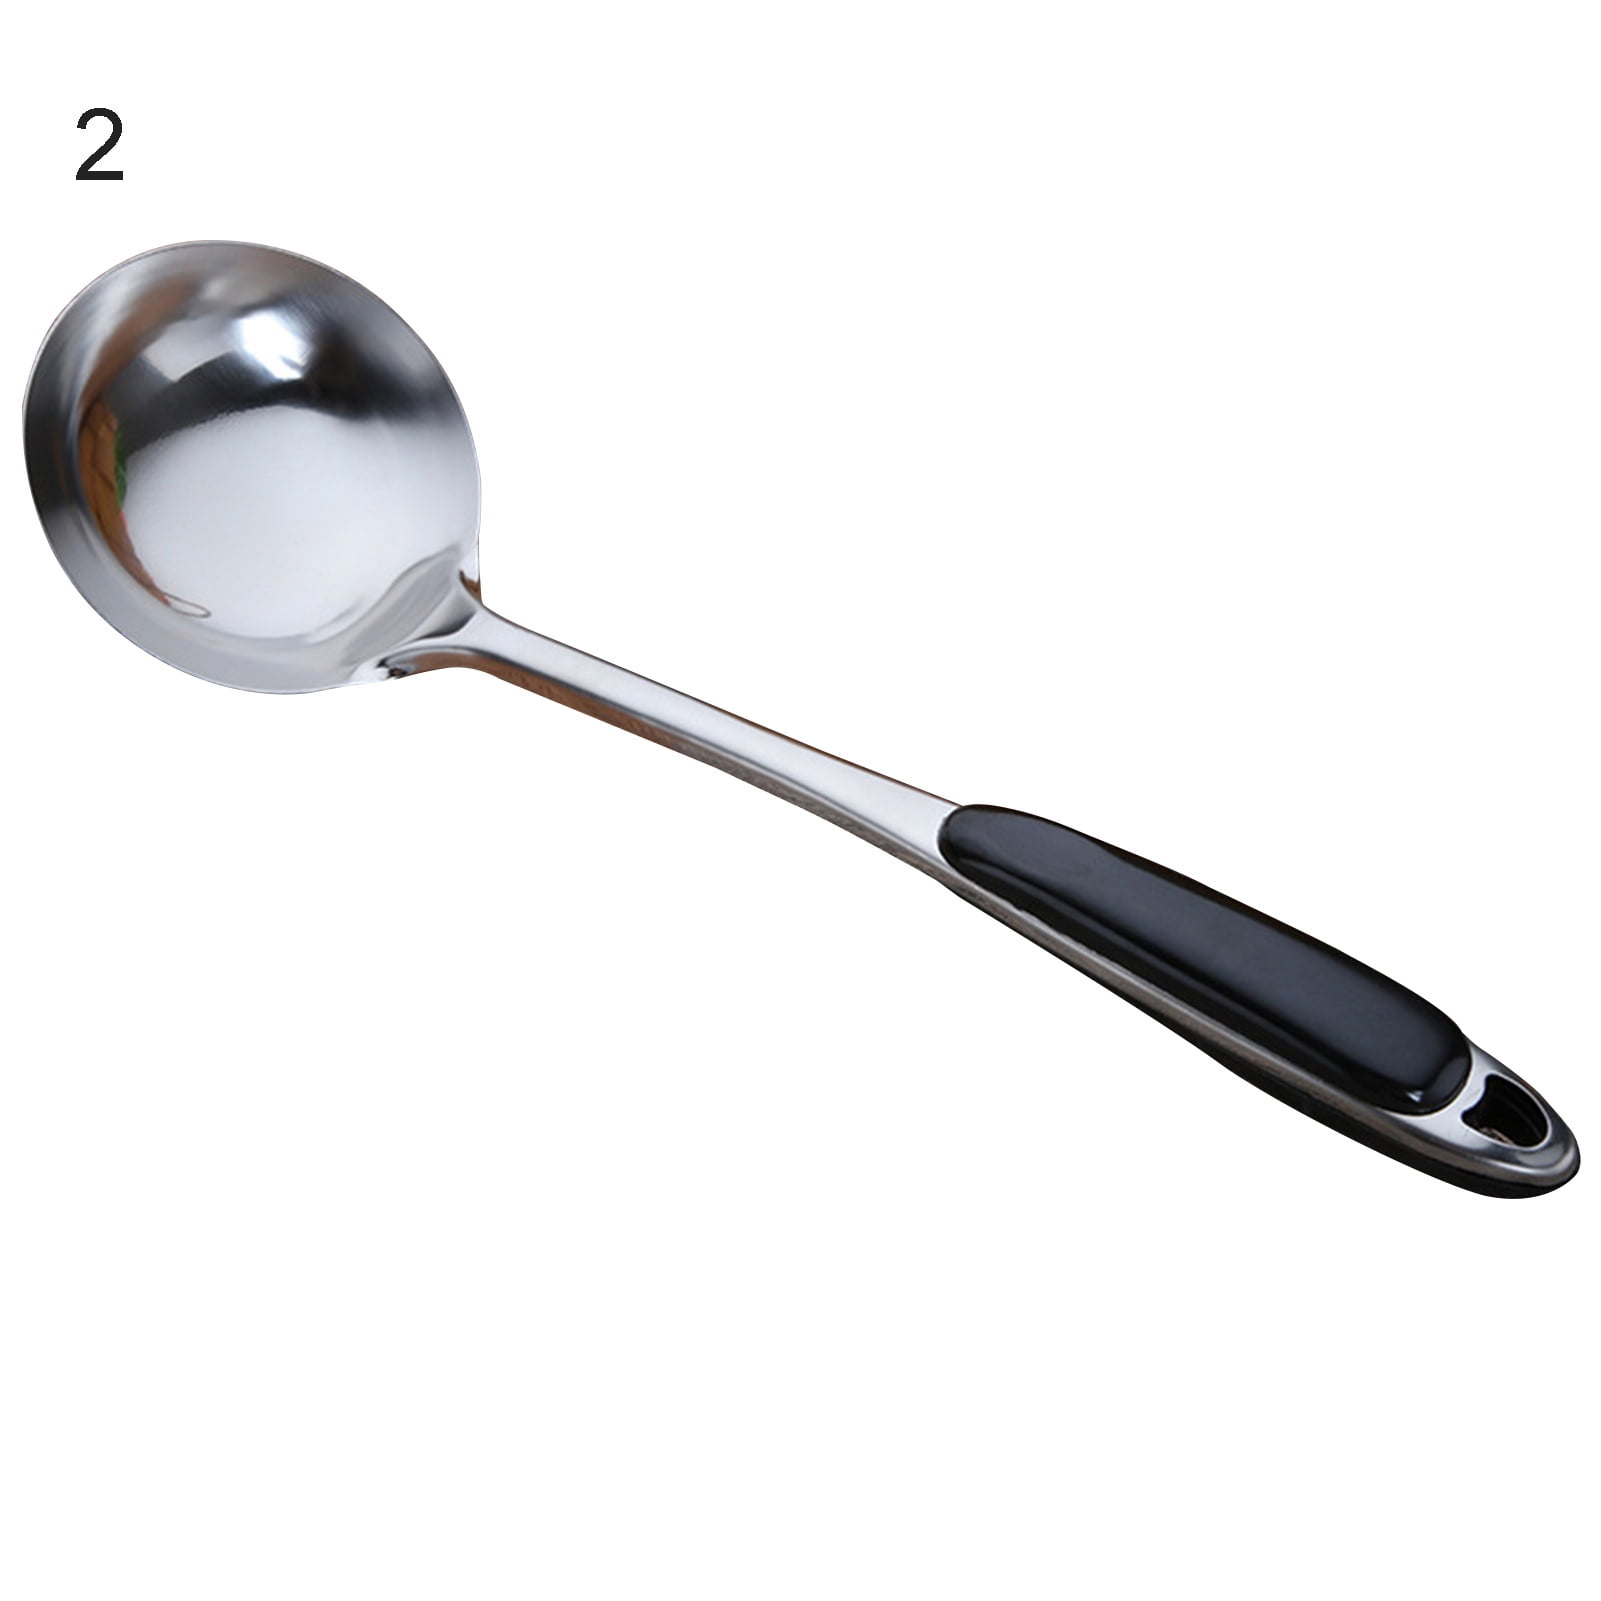 Rice Household Kitchen Accessories Skimmer Cooking Tool Set Stainless Steel  Ice Cream Scoop Soup Leakage Soup Ladle Spoon ROSE RED SPOON 